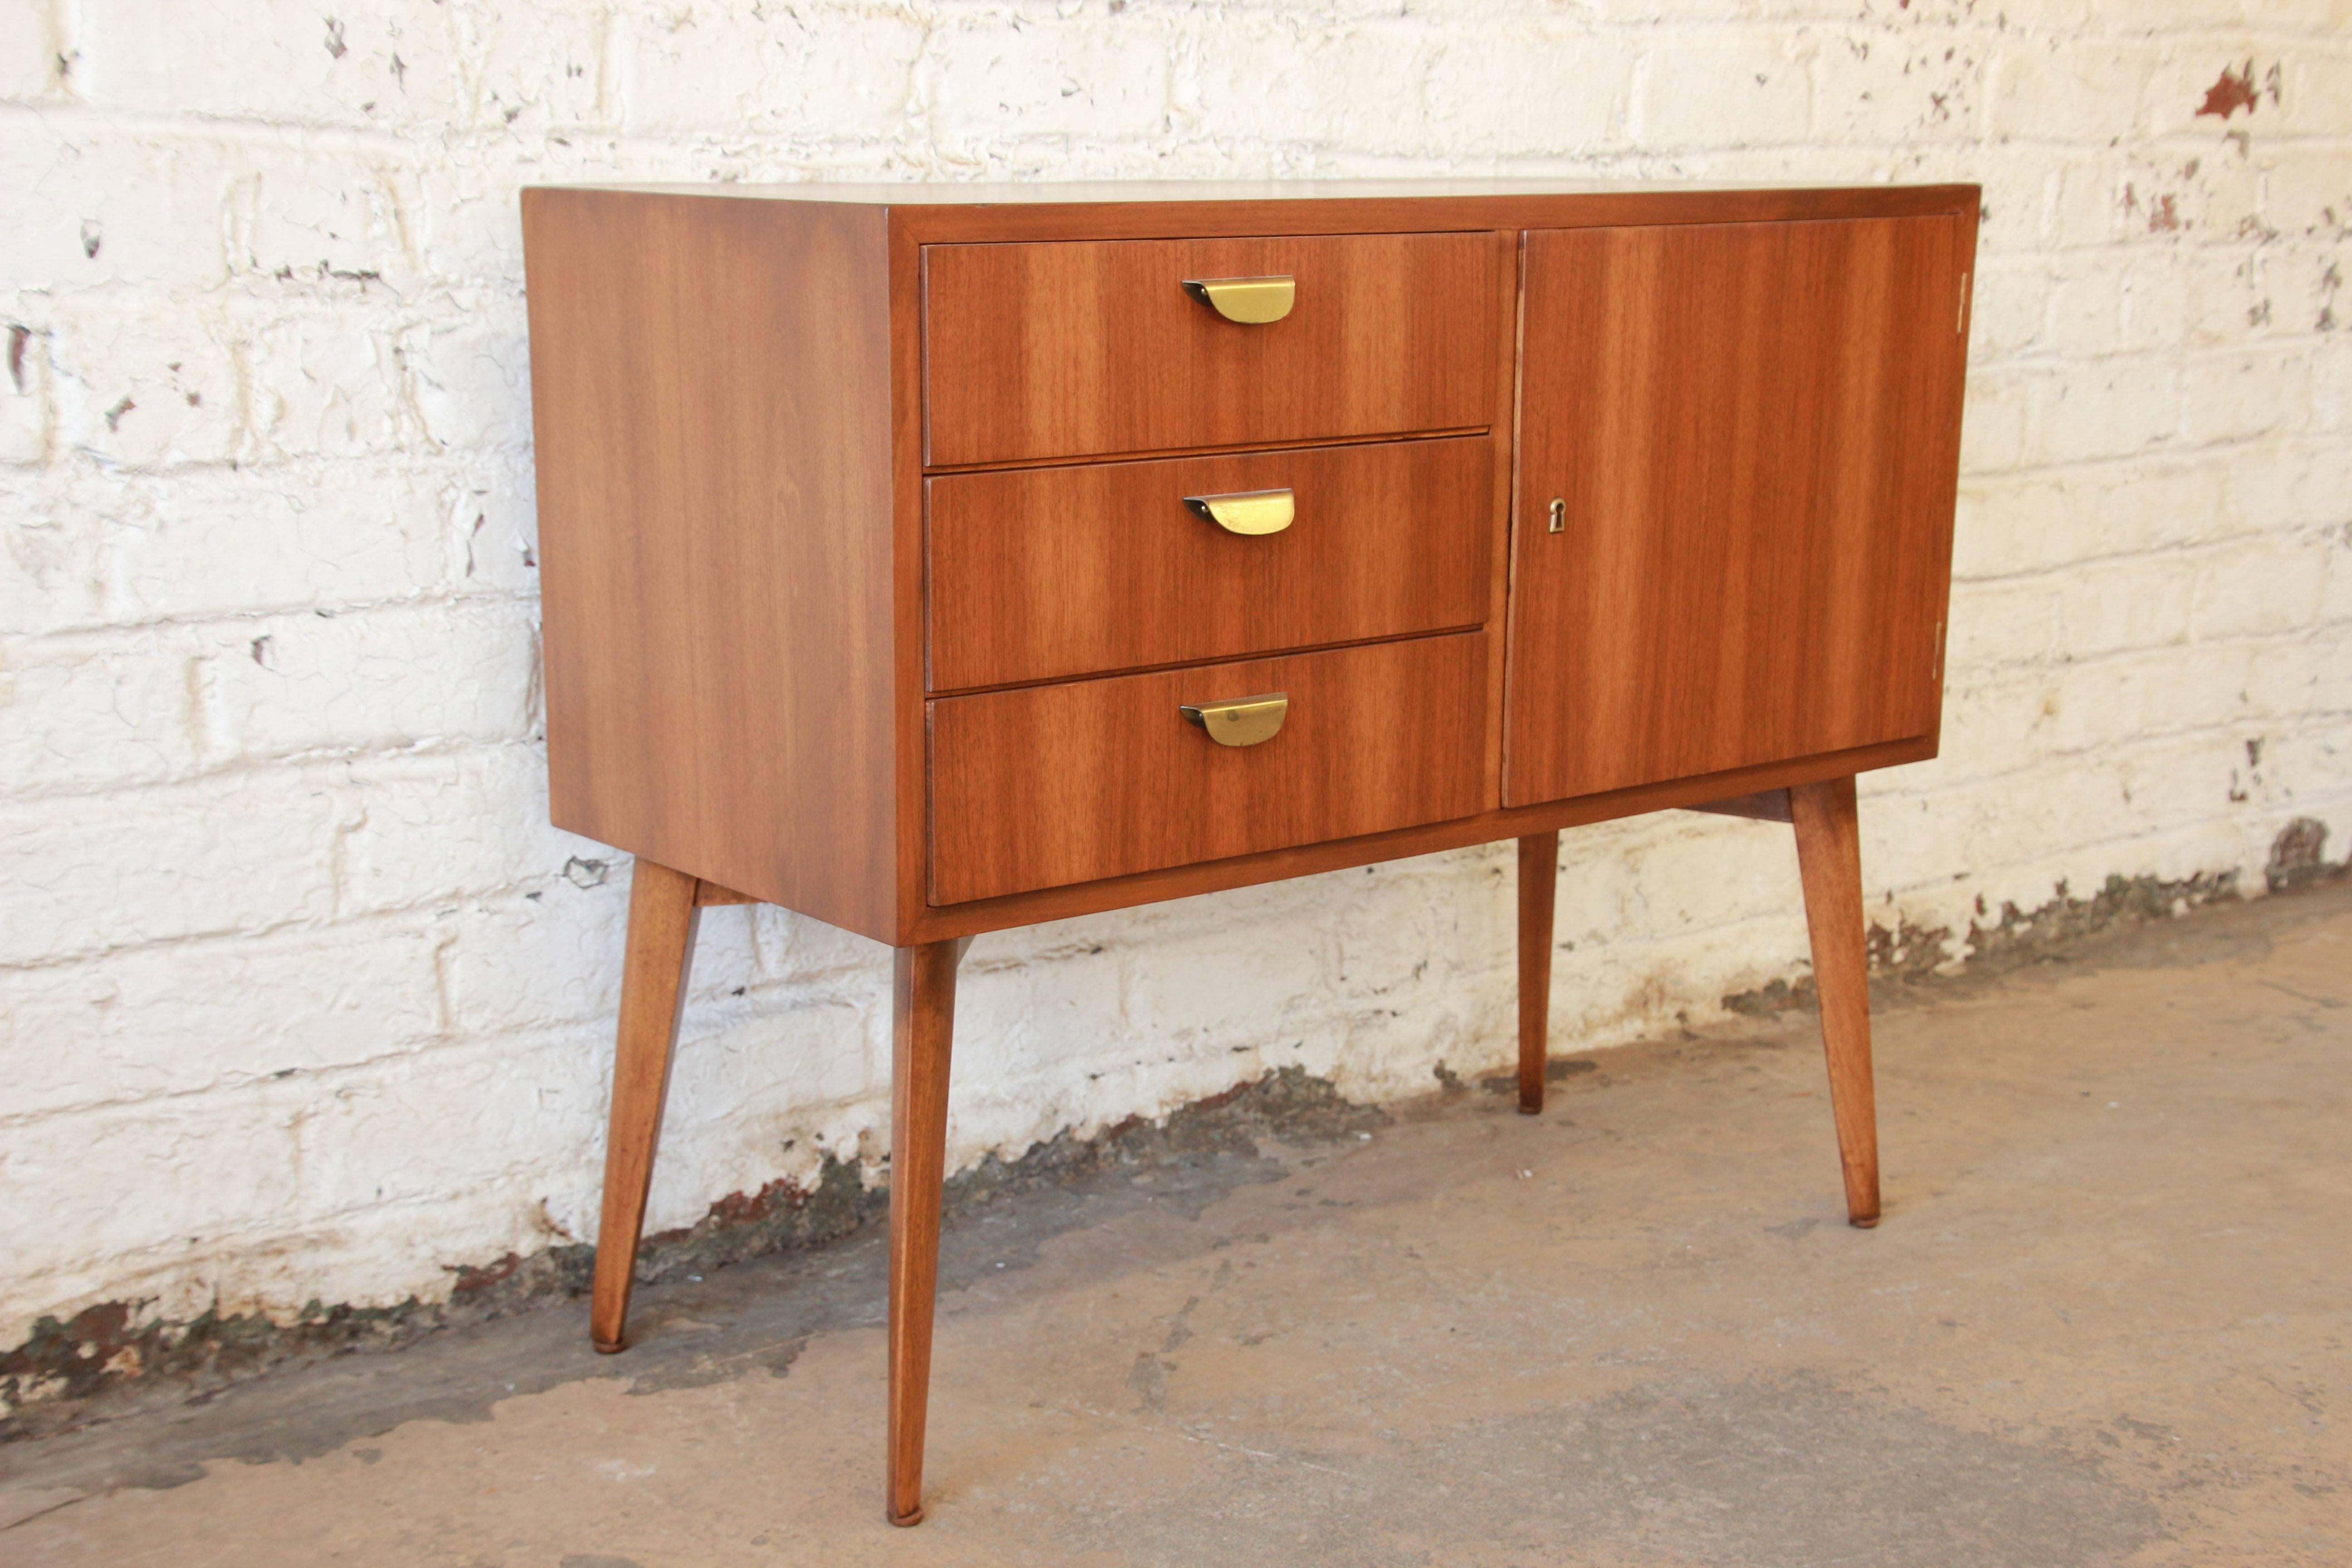 A rare and stunning Mid-Century Modern credenza or dresser designed in Germany by Helmut Magg for WK Möbel. The credenza features clean, sleek Mid-Century Modern lines with Minimalist design and a beautiful walnut wood grain. It offers ample room